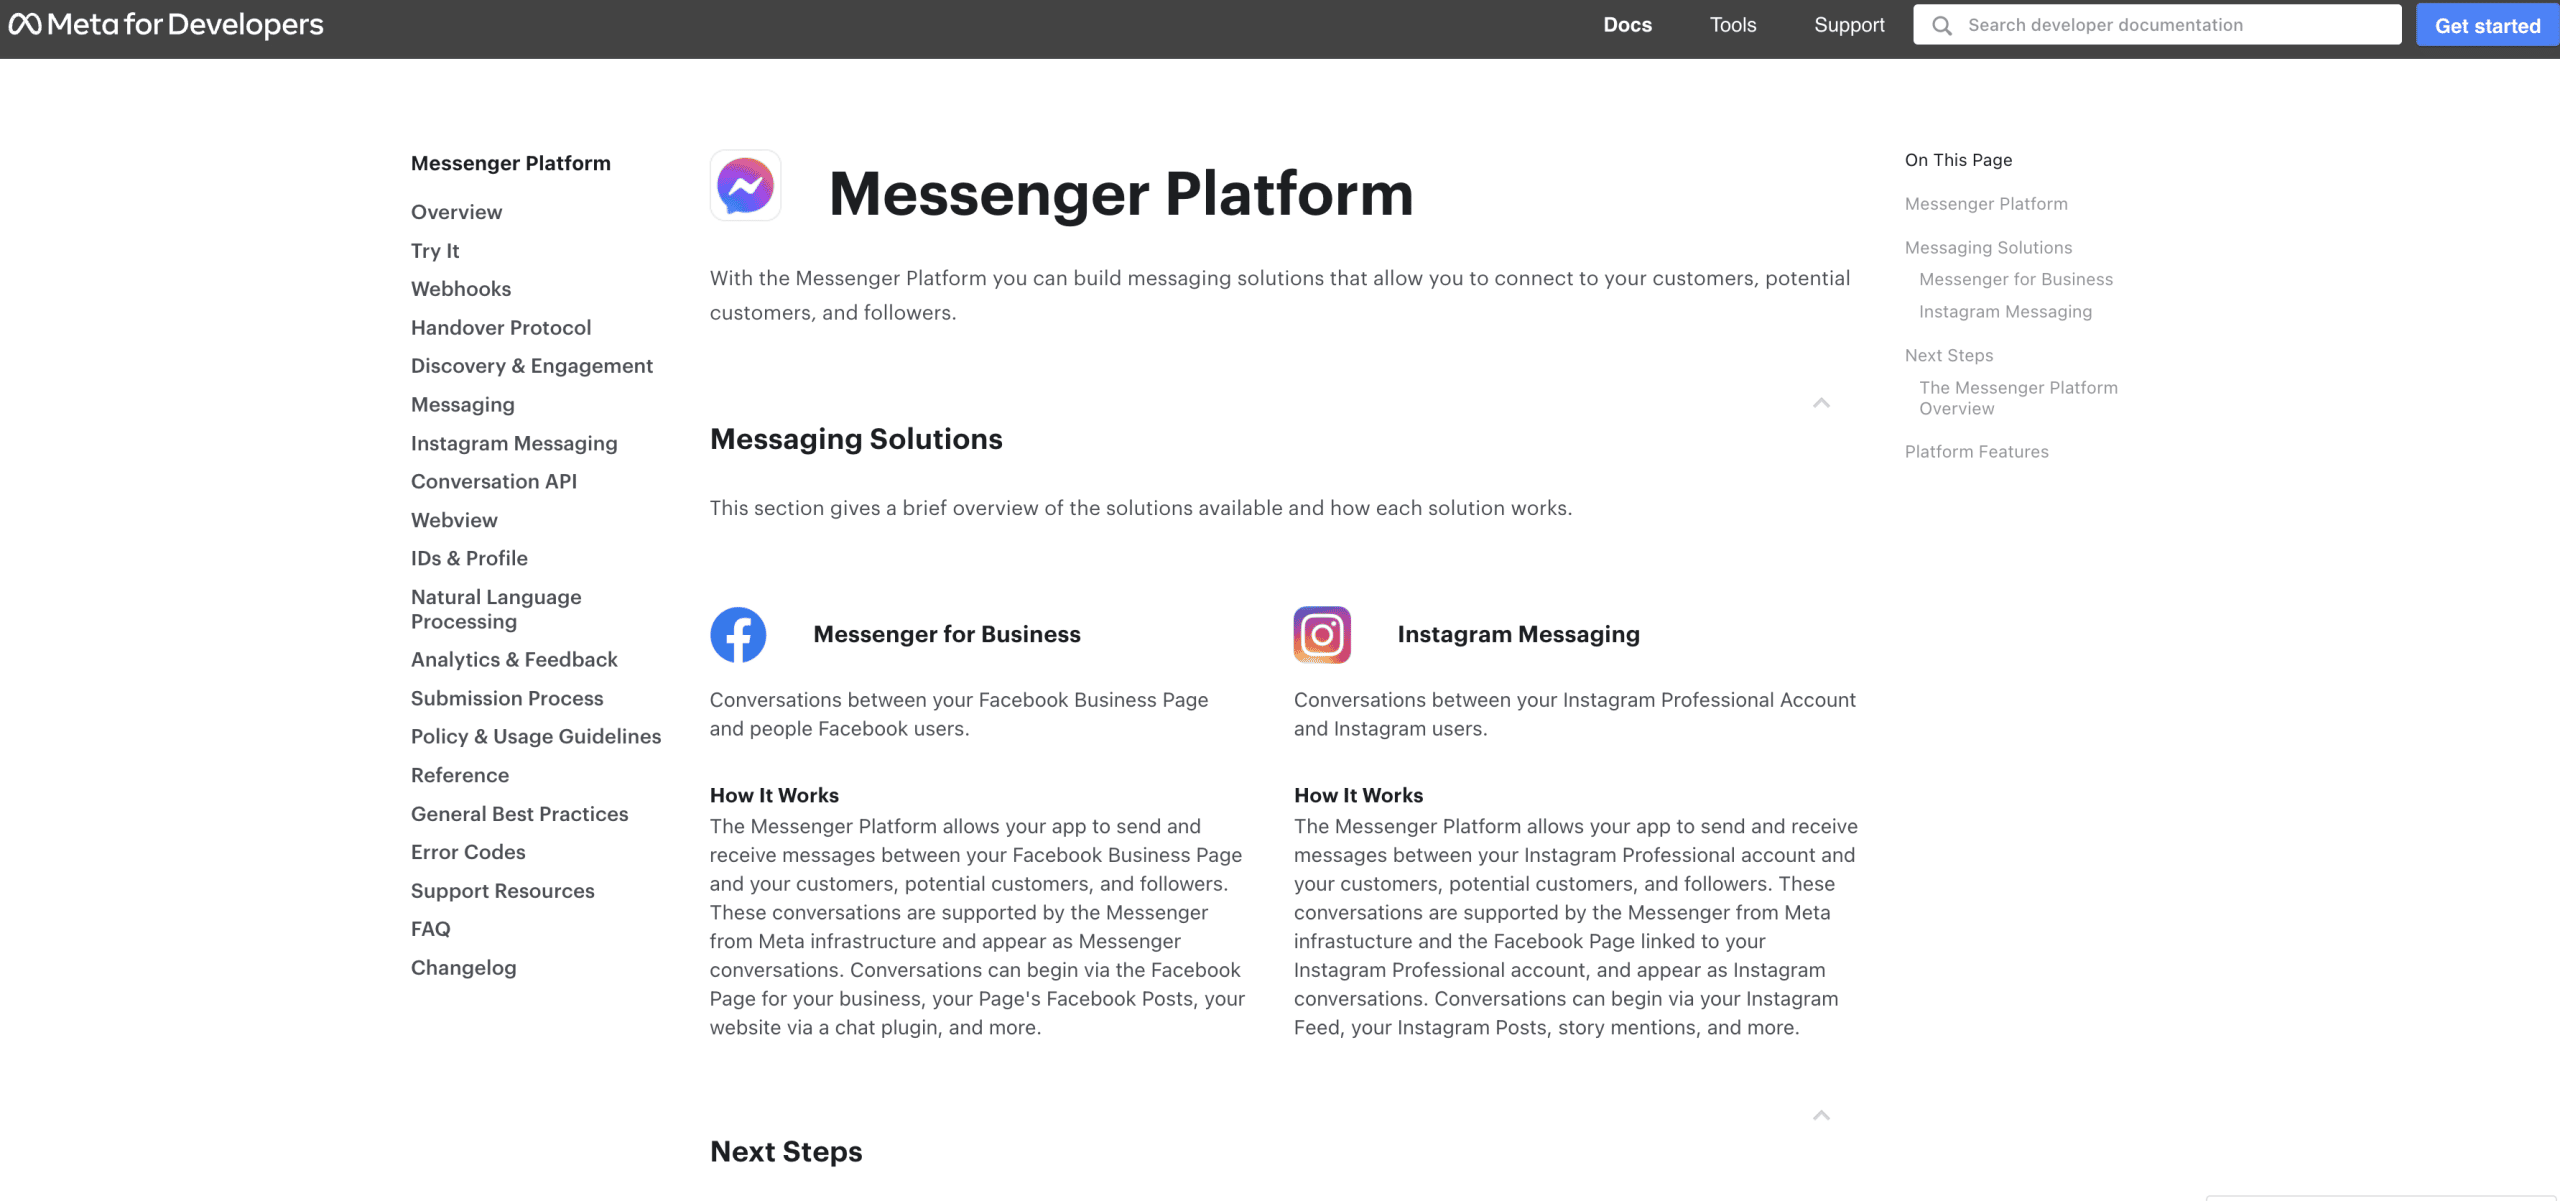 With the Messenger Platform you can build chatbot messaging solutions that allow you to connect to your customers, potential customers, and followers.